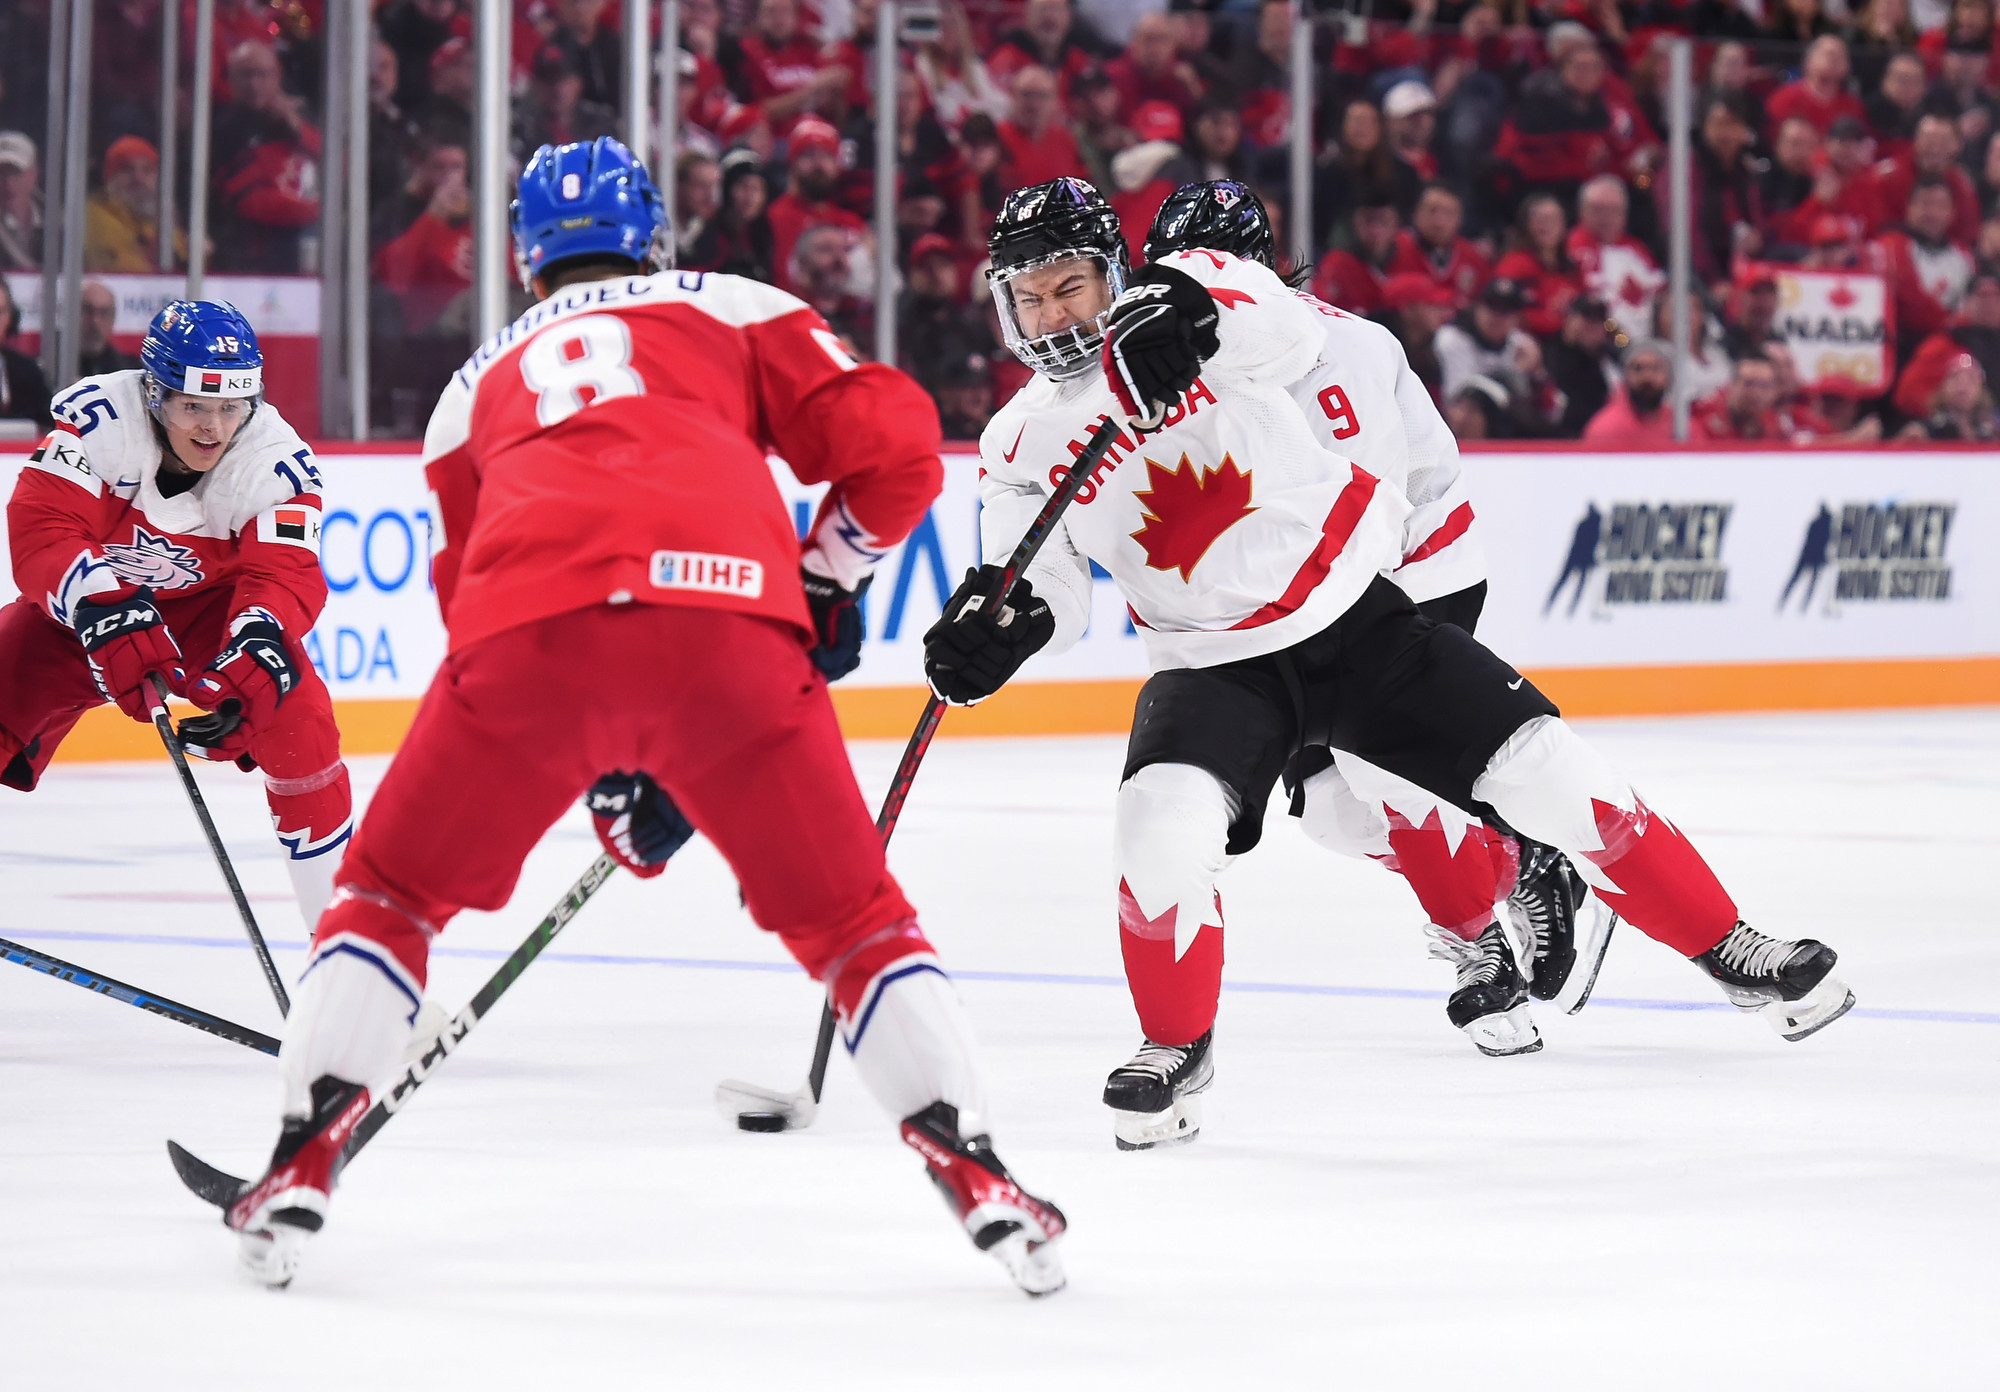 DYLAN GUENTHER GOLDEN GOAL FOR TEAM CANADA! 